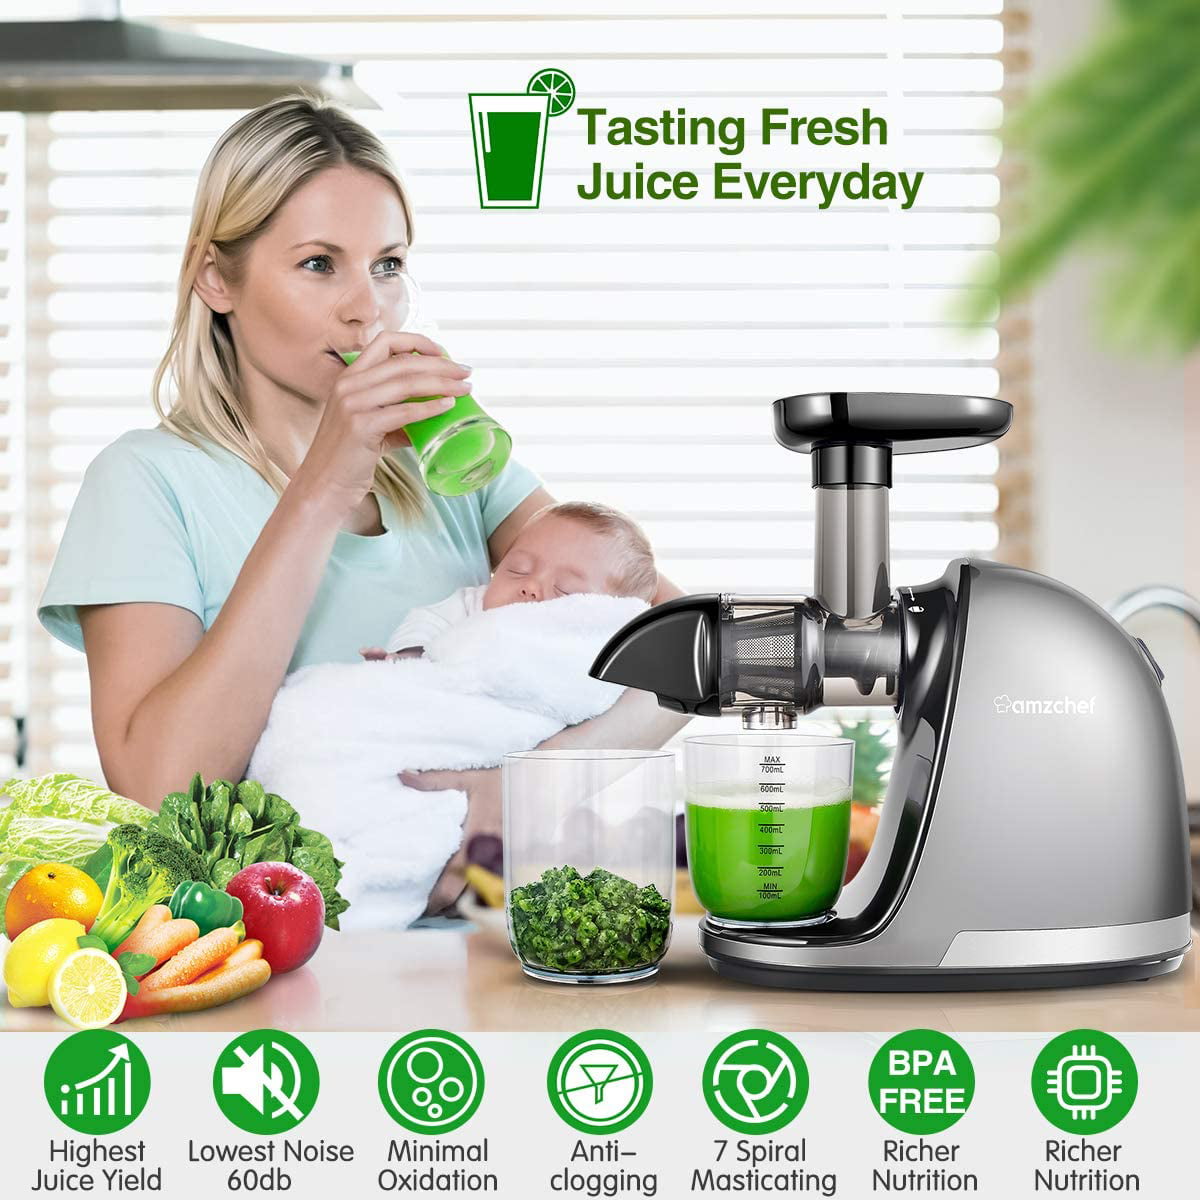 BPA Free Amzdeal Slow Juicer Masticating Juicer Machine 200W Cold Press Juicer Creates Fresh and Nutrient Fruit and Veg Juice with Reverse Function and Quiet Motor 